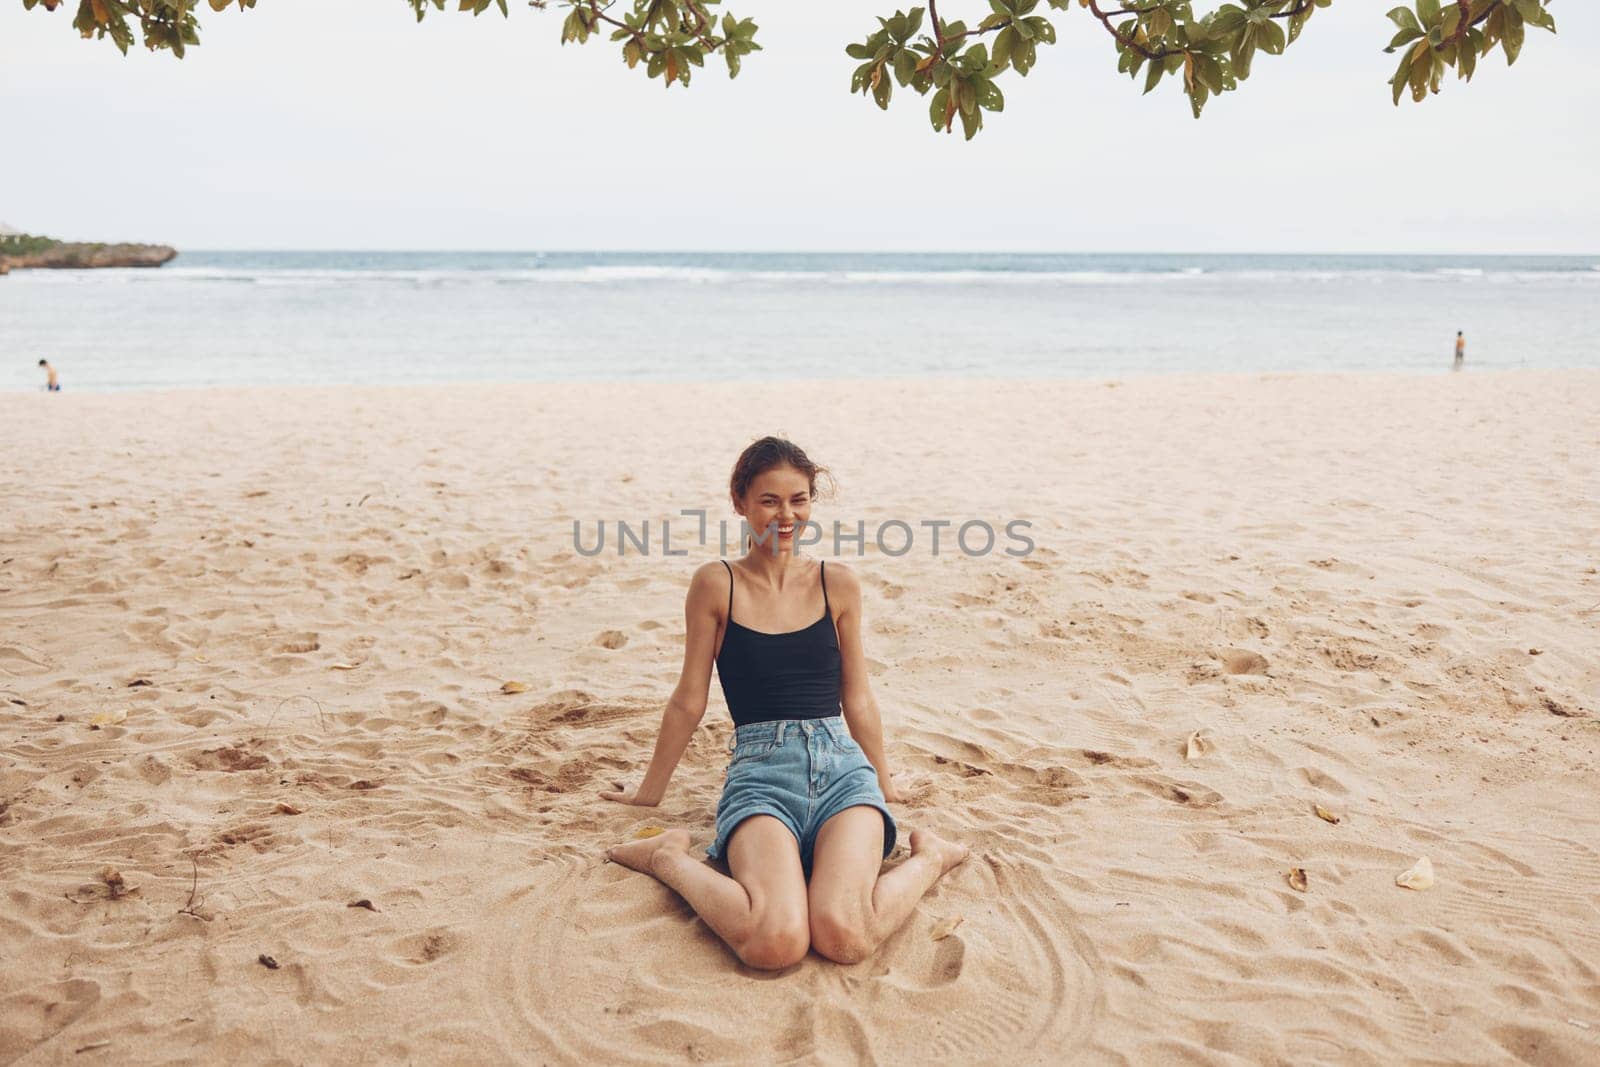 woman tan water model smile lifestyle view travel sea beach back freedom sitting outdoor vacation sand beautiful bali coast sexy nature pretty